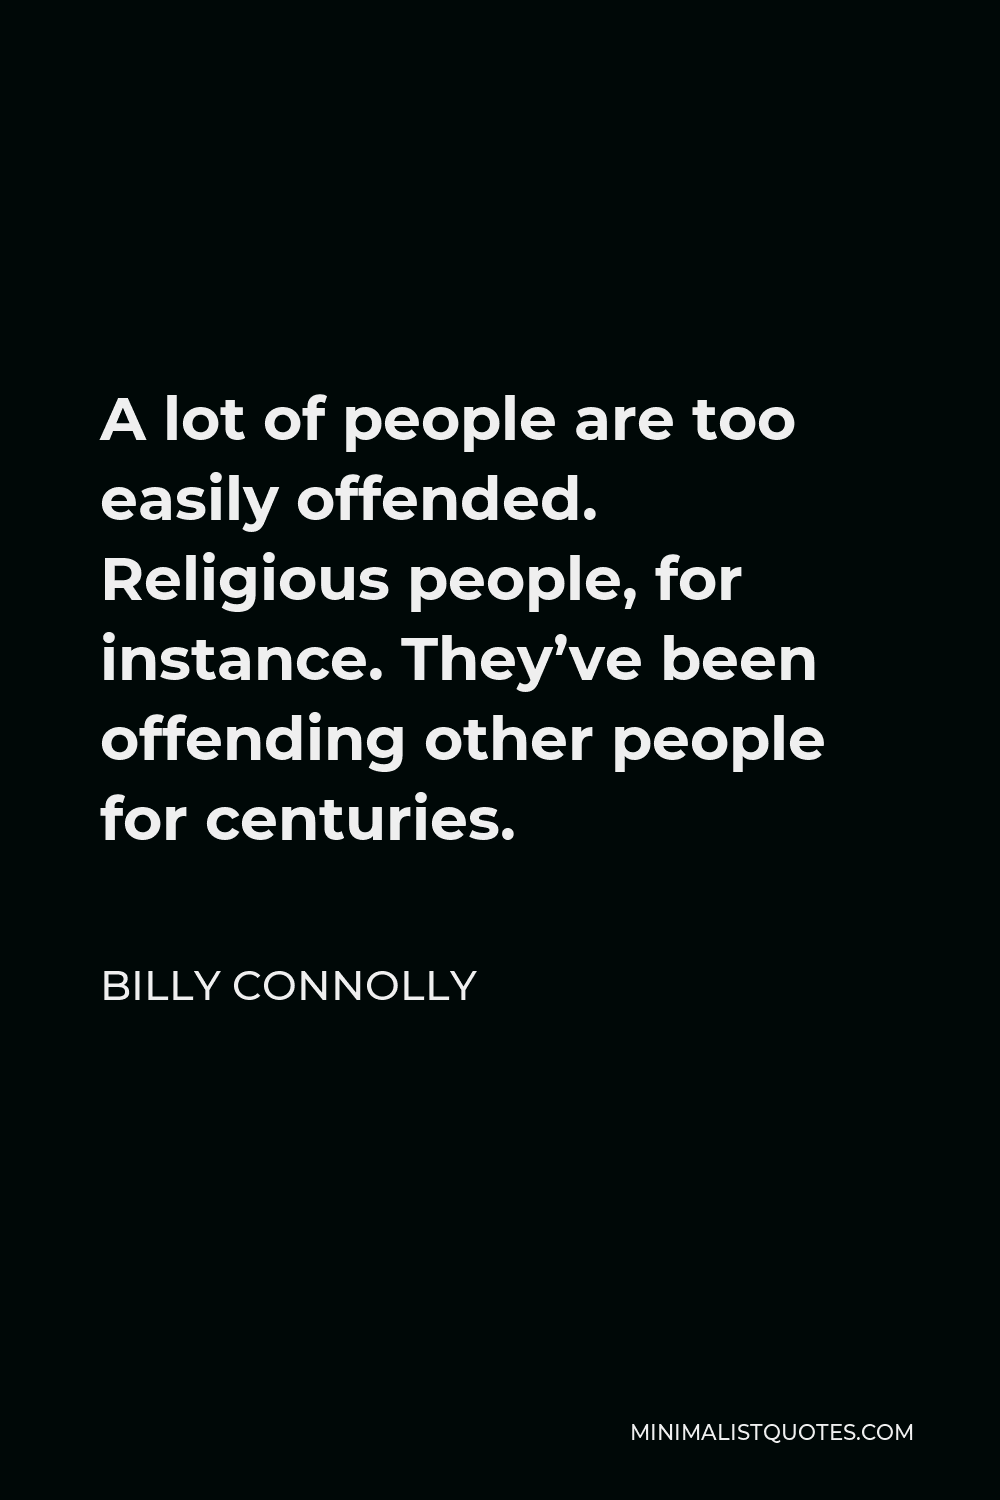 Billy Connolly Quote - A lot of people are too easily offended. Religious people, for instance. They’ve been offending other people for centuries.